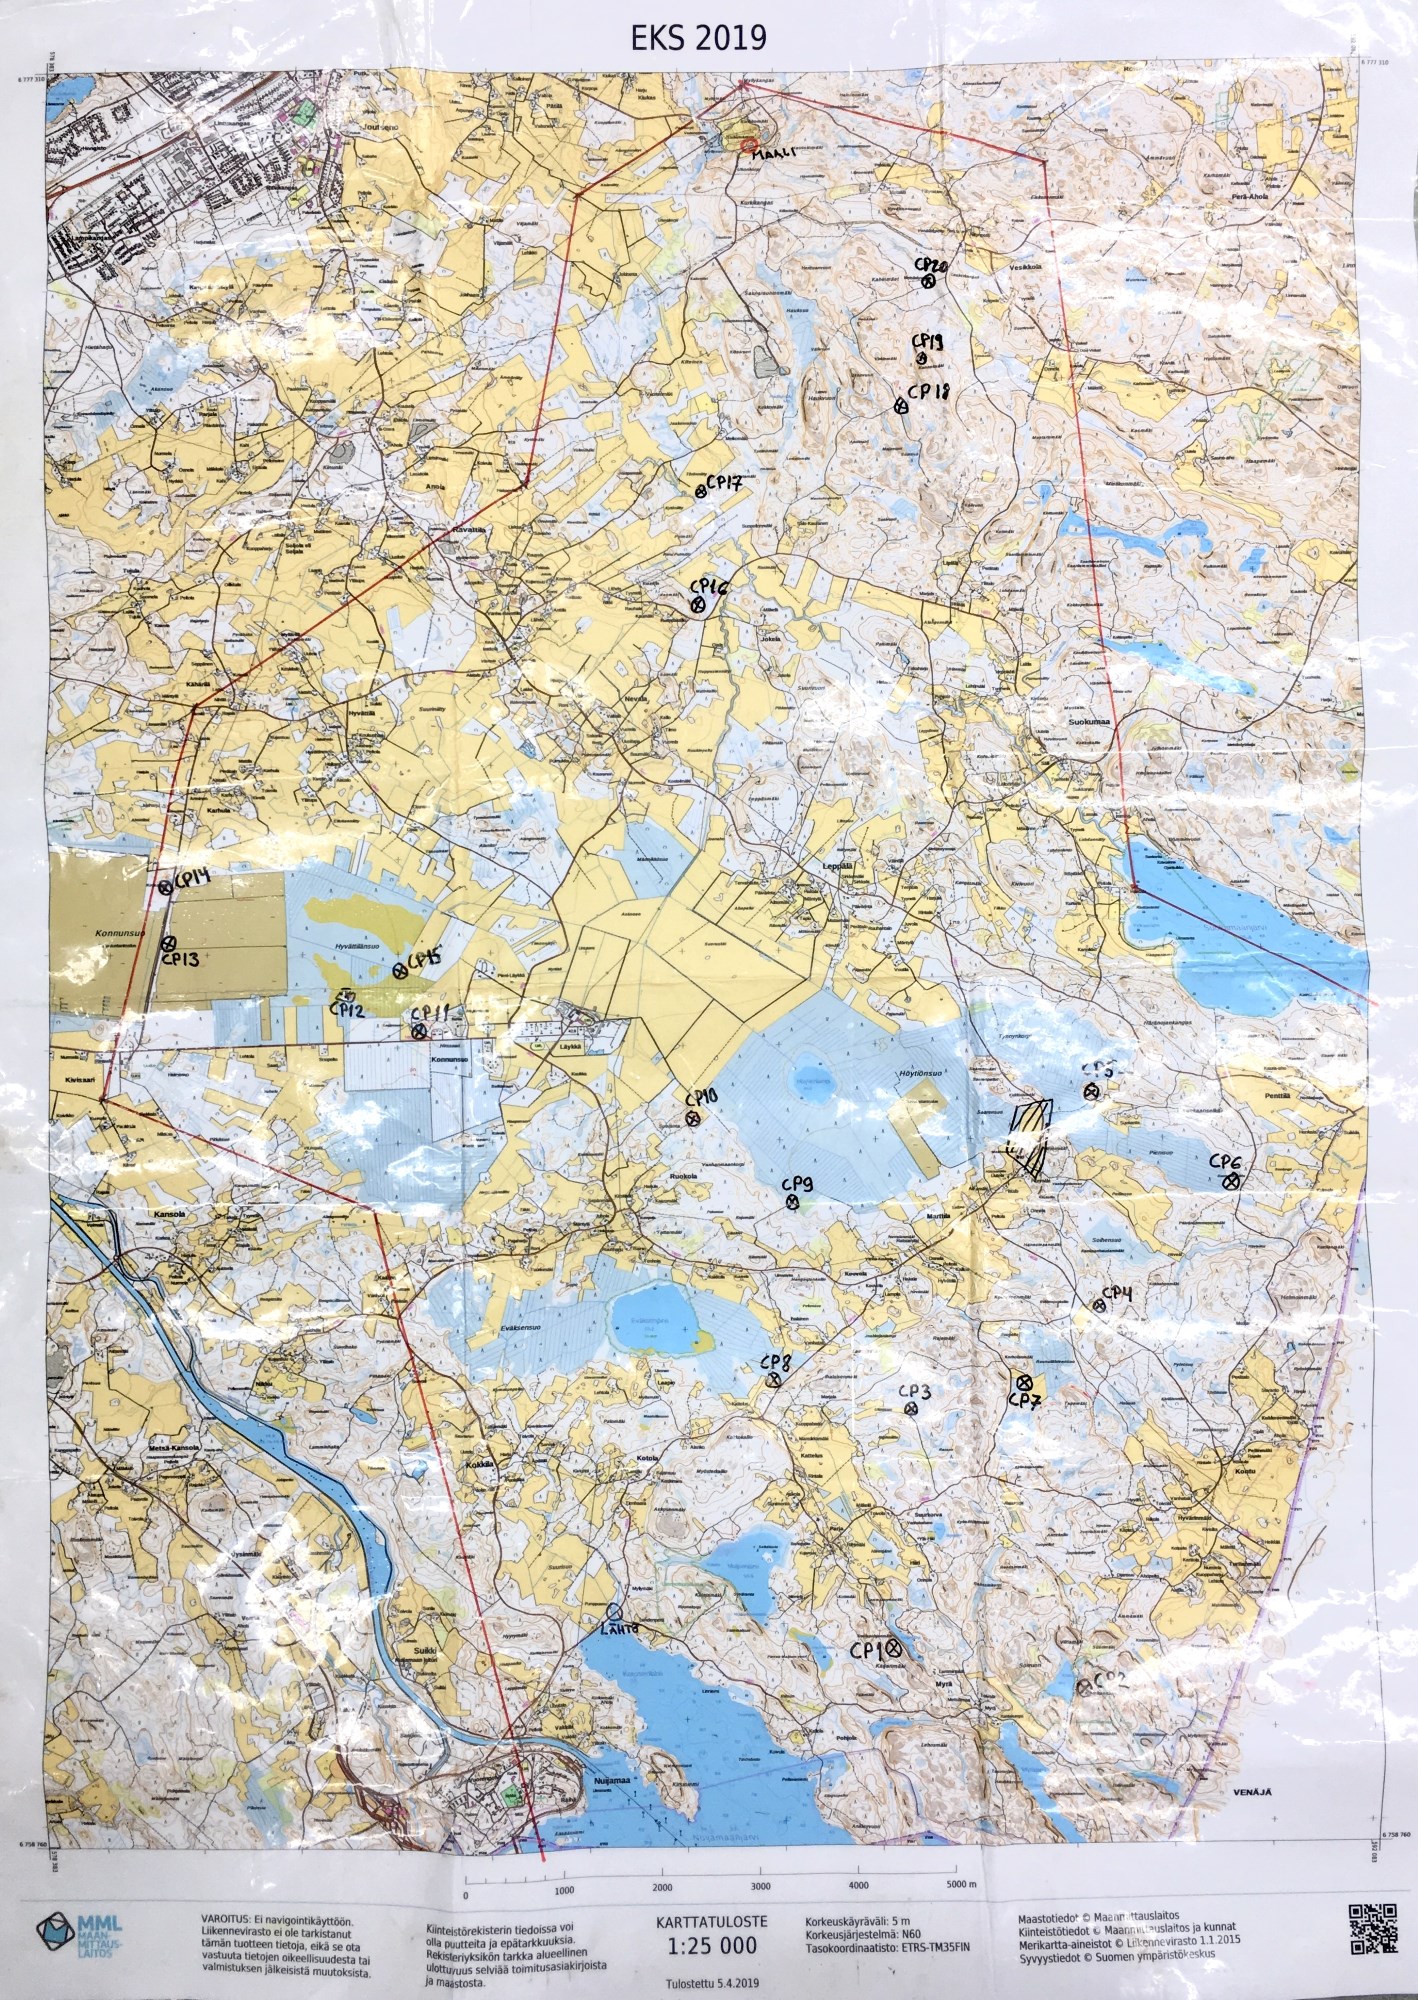 A map EKS 2019 with control points marked on it.